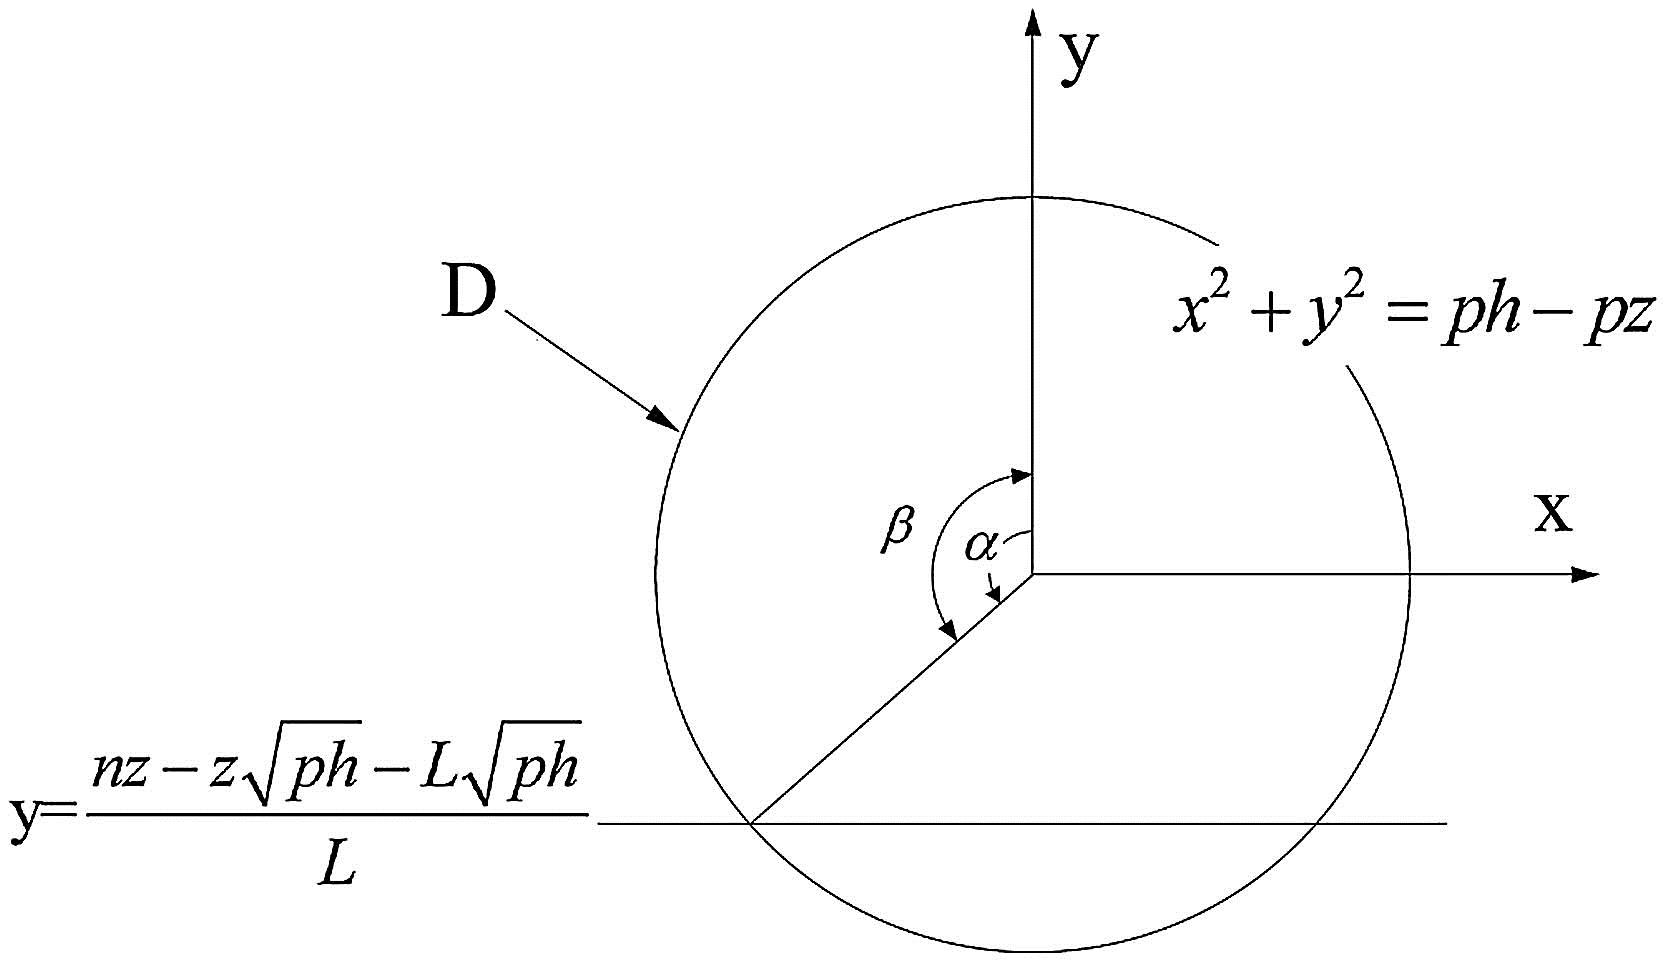 Coated arc of the circle x2+y2=ph−pz.